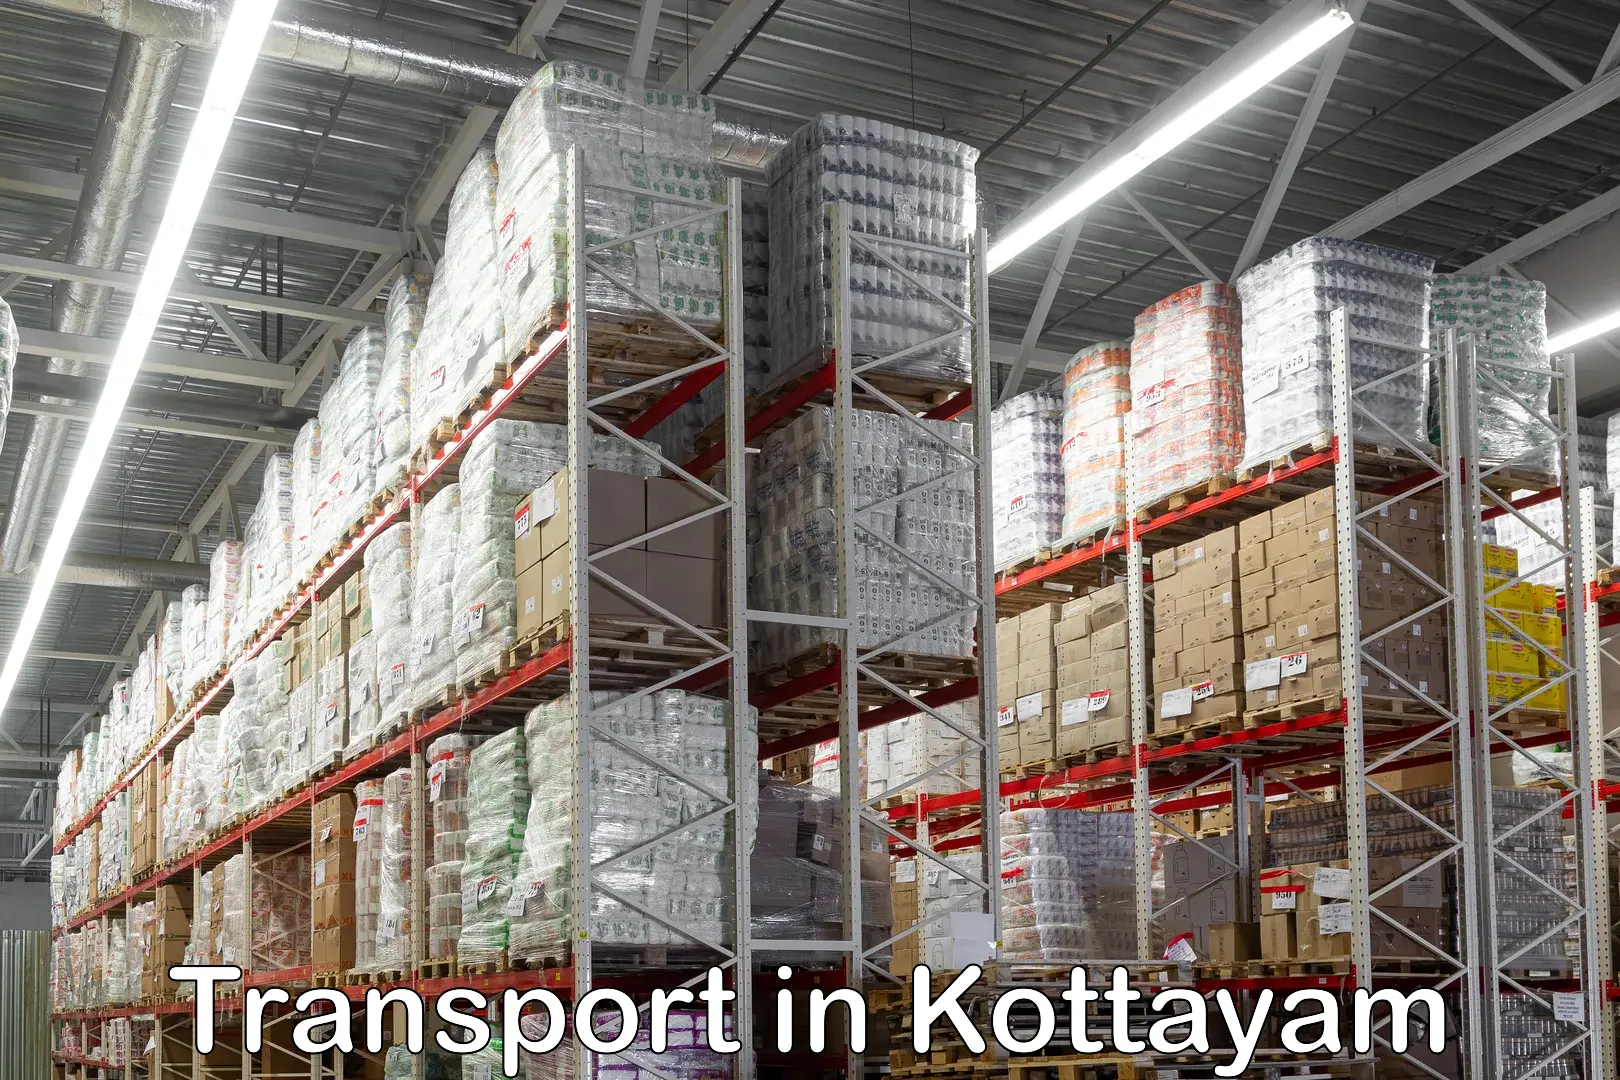 Daily parcel service transport in Kottayam